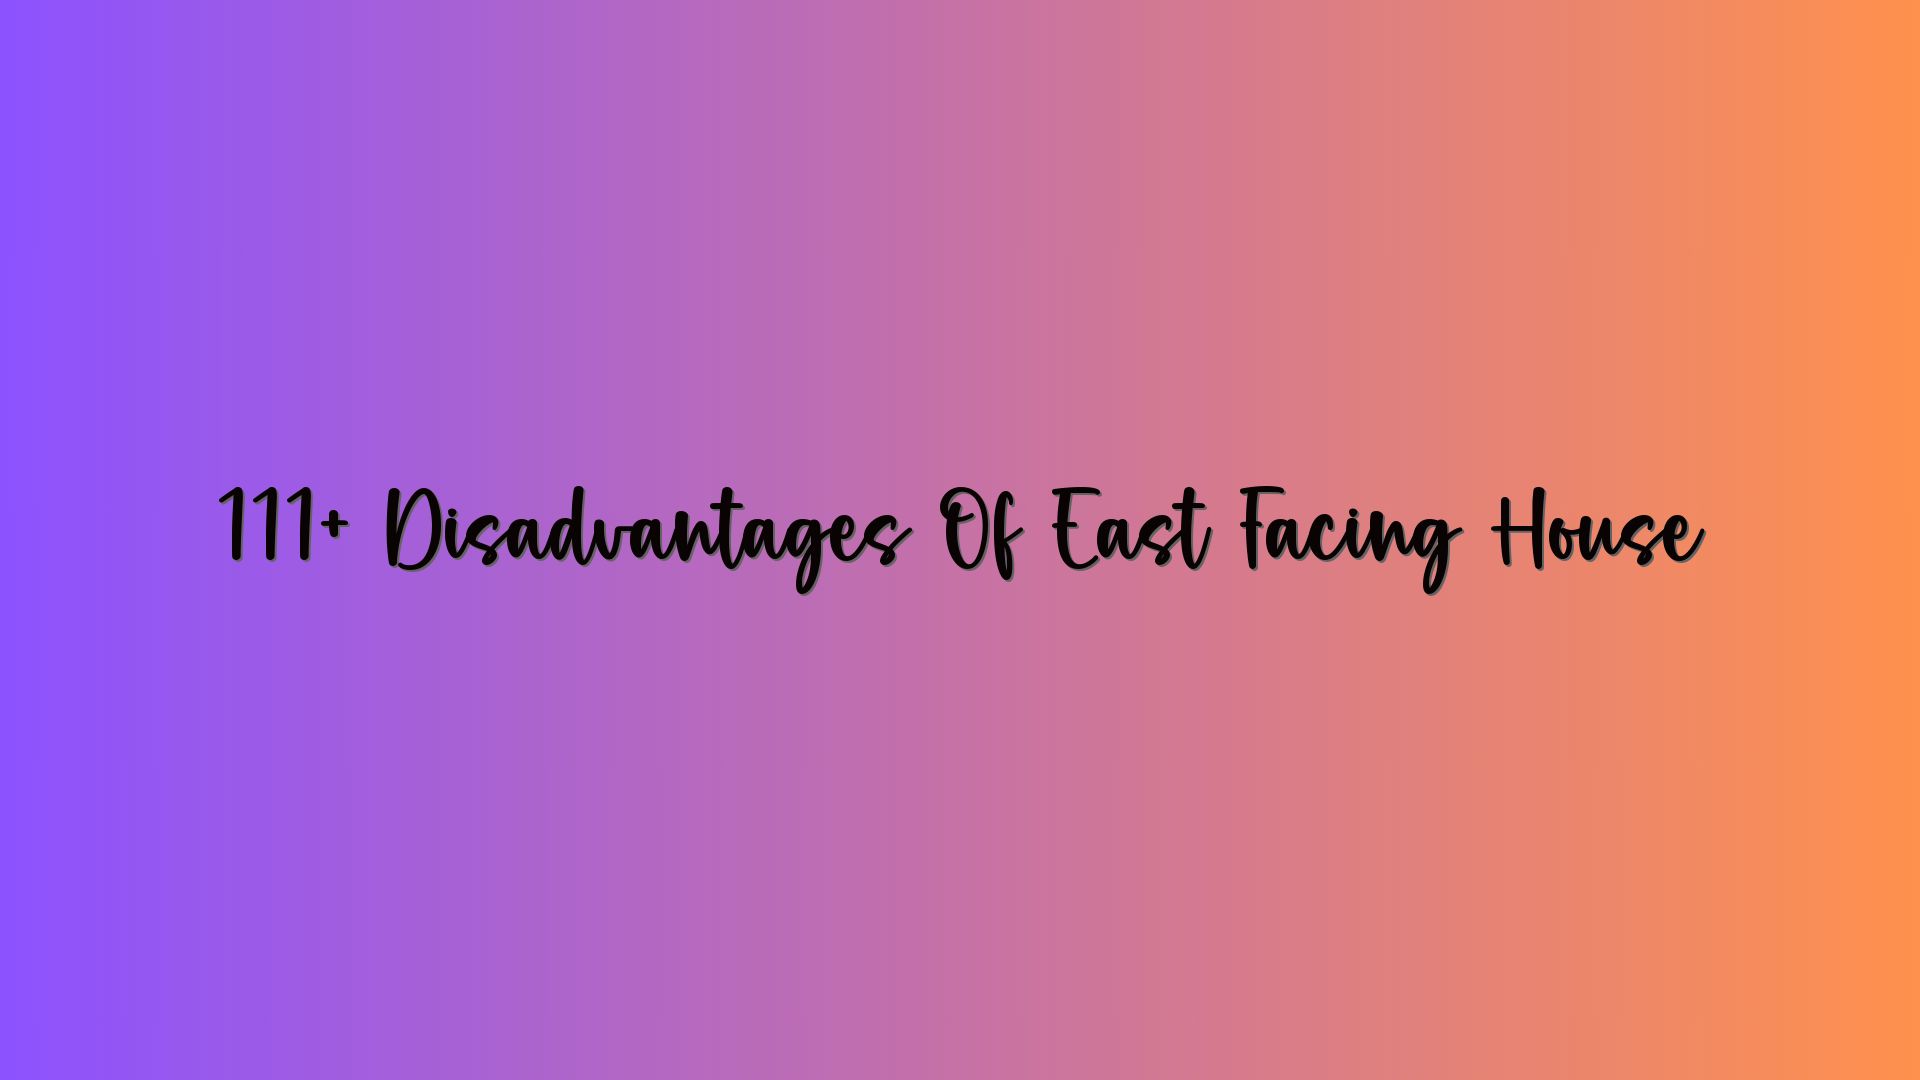 111+ Disadvantages Of East Facing House